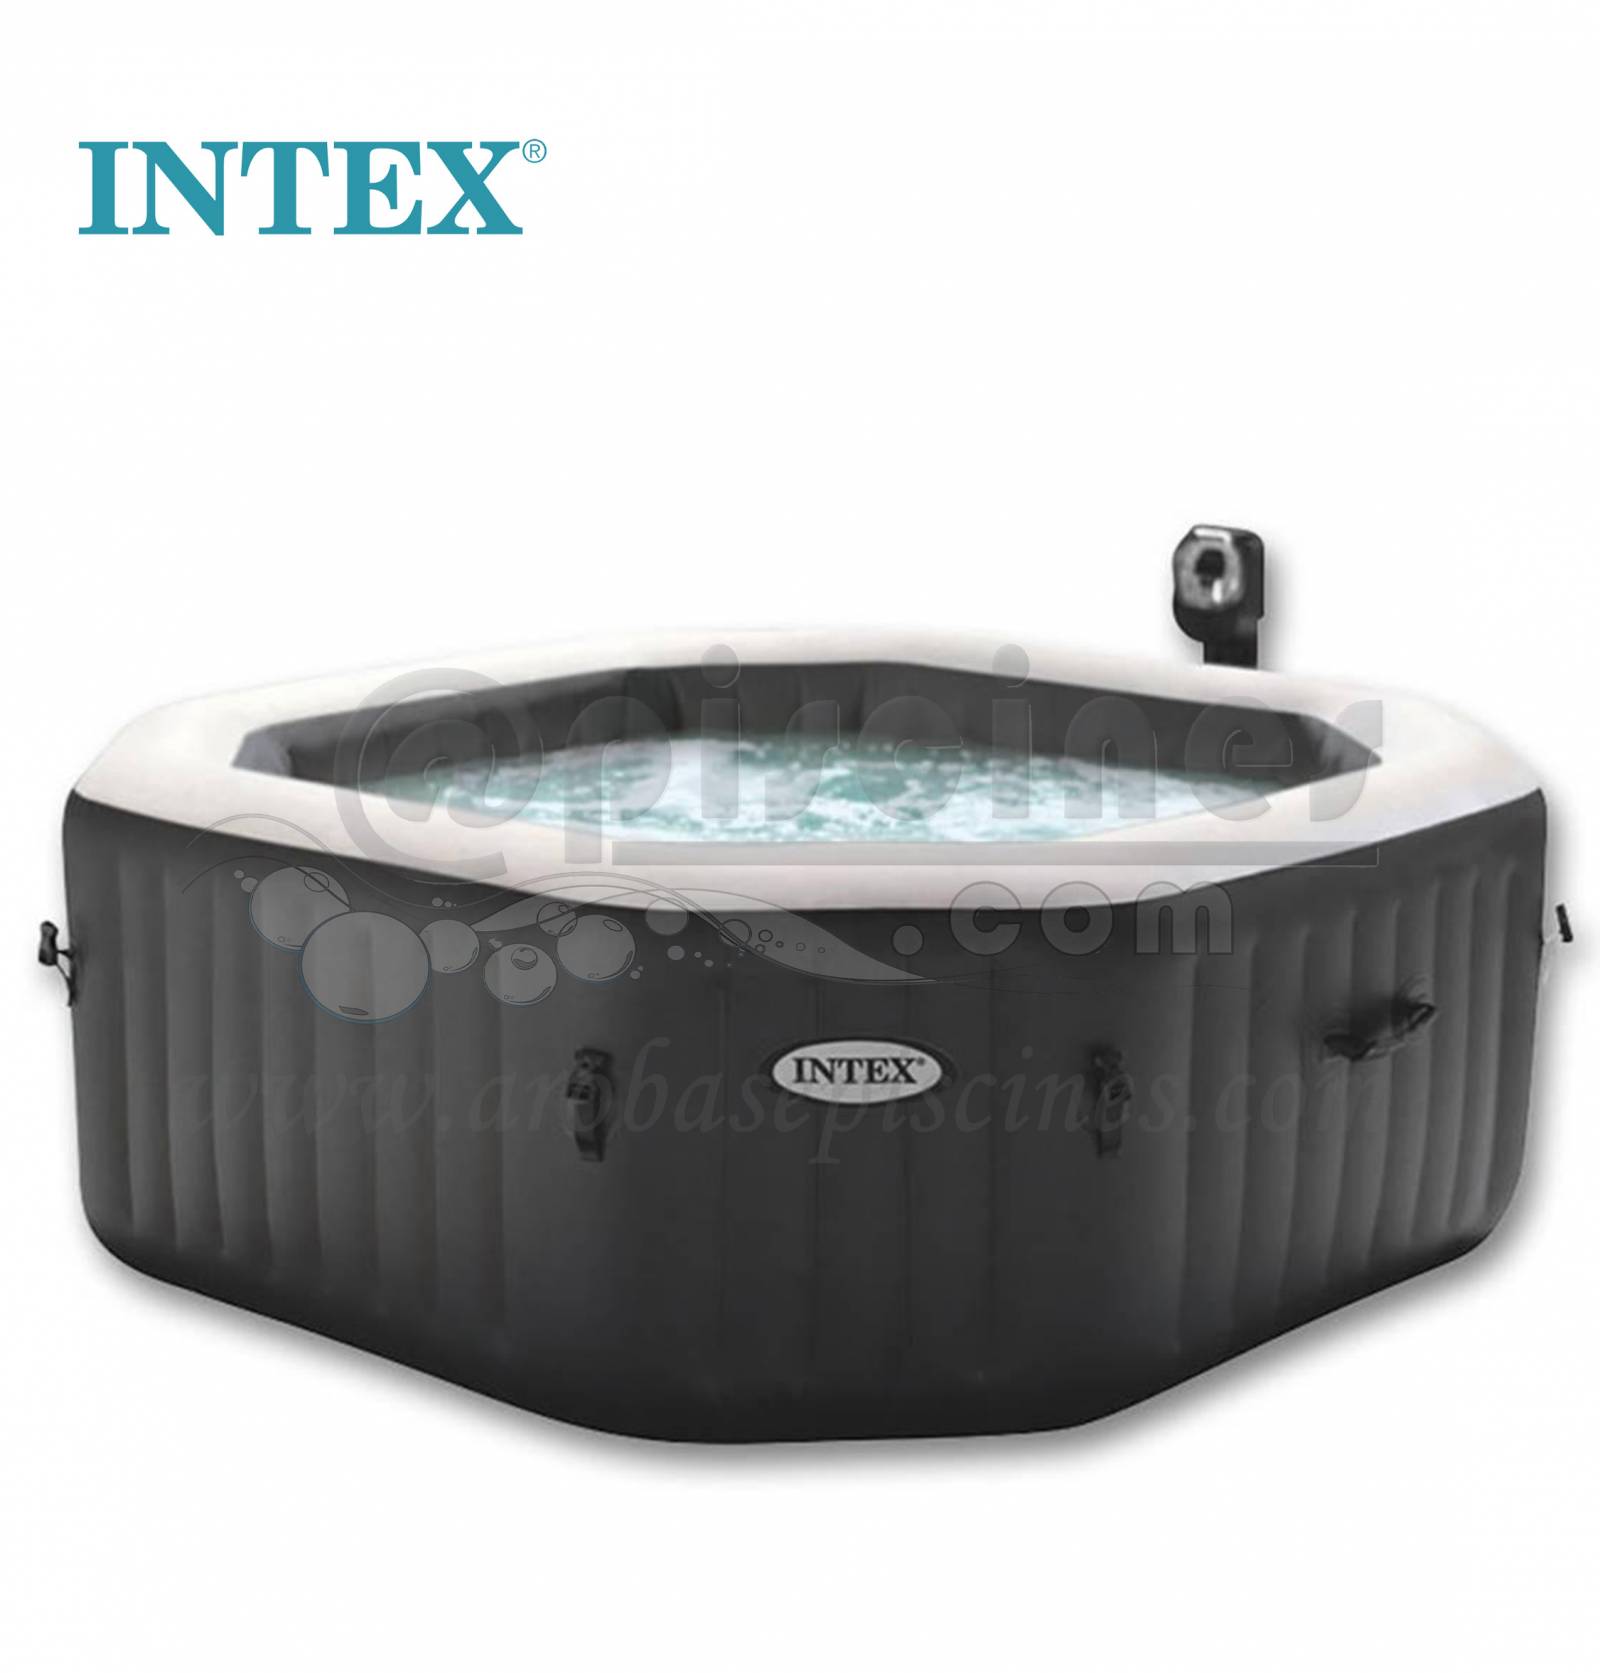 Pure spa gonflable INTEX Carbone, octogonal 6 places